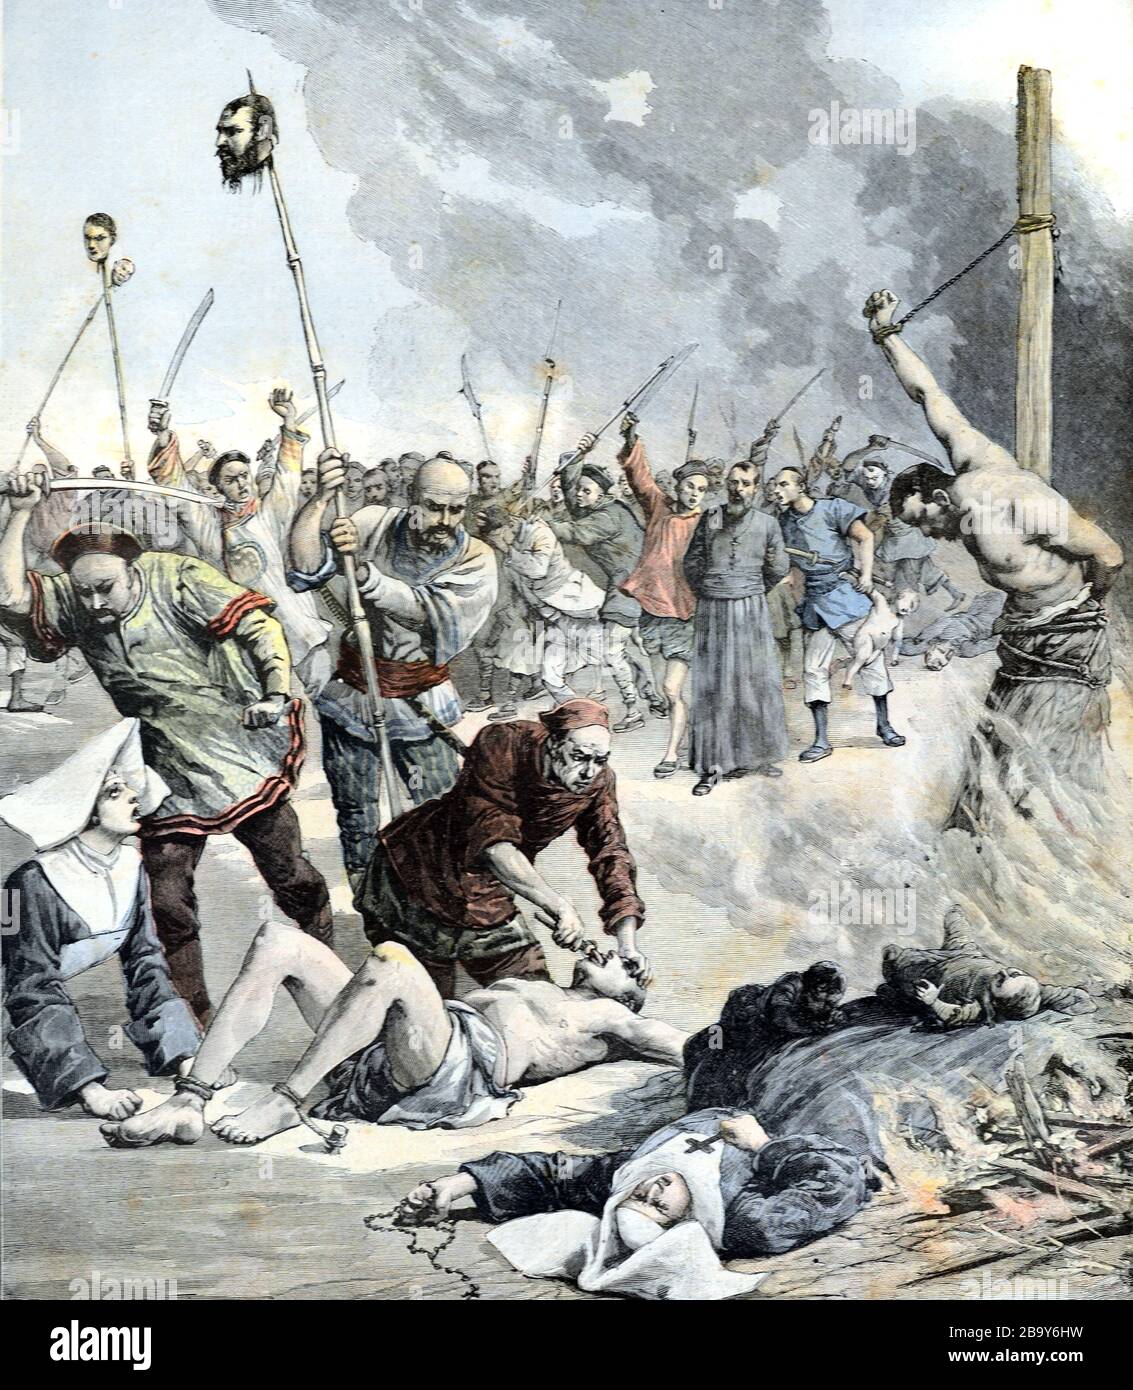 Massacre of Christians During Boxer Rebellion, Boxer Uprising or Yihetuan Movement (1899-1901) An Anti-Imperialist, Anti-Foreign & Anti-Christian Uprising in China towards the end of the Qing Dynasty. Vintage of Old Illustration. Stock Photo